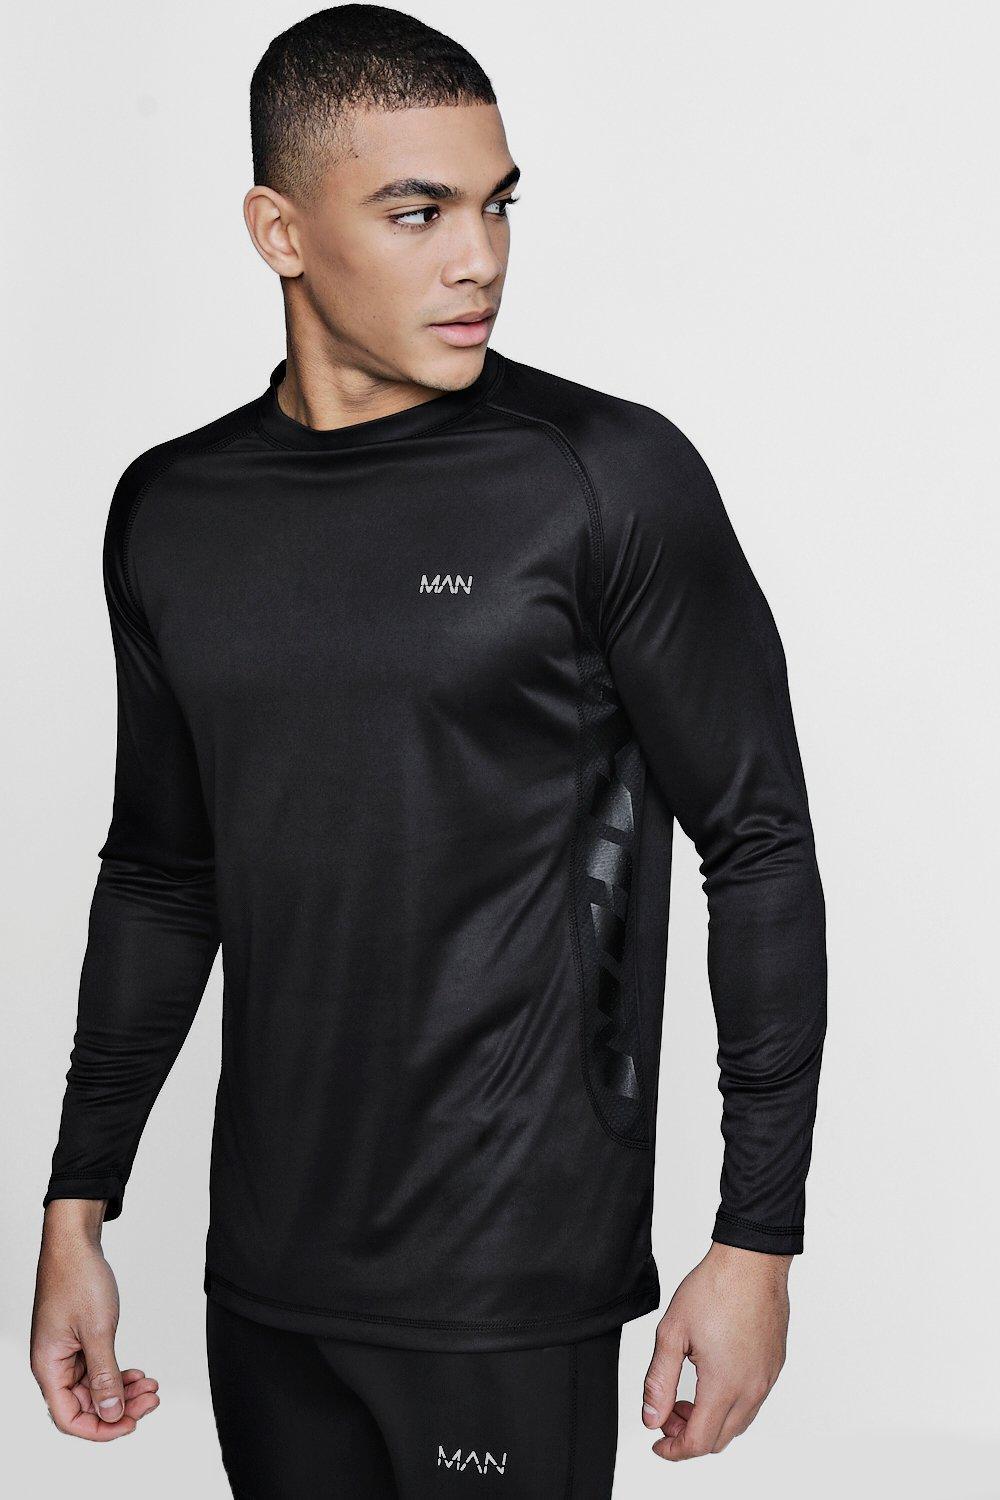 Download Boohoo Long Sleeve Active Man Side Print Gym T-shirt in ...